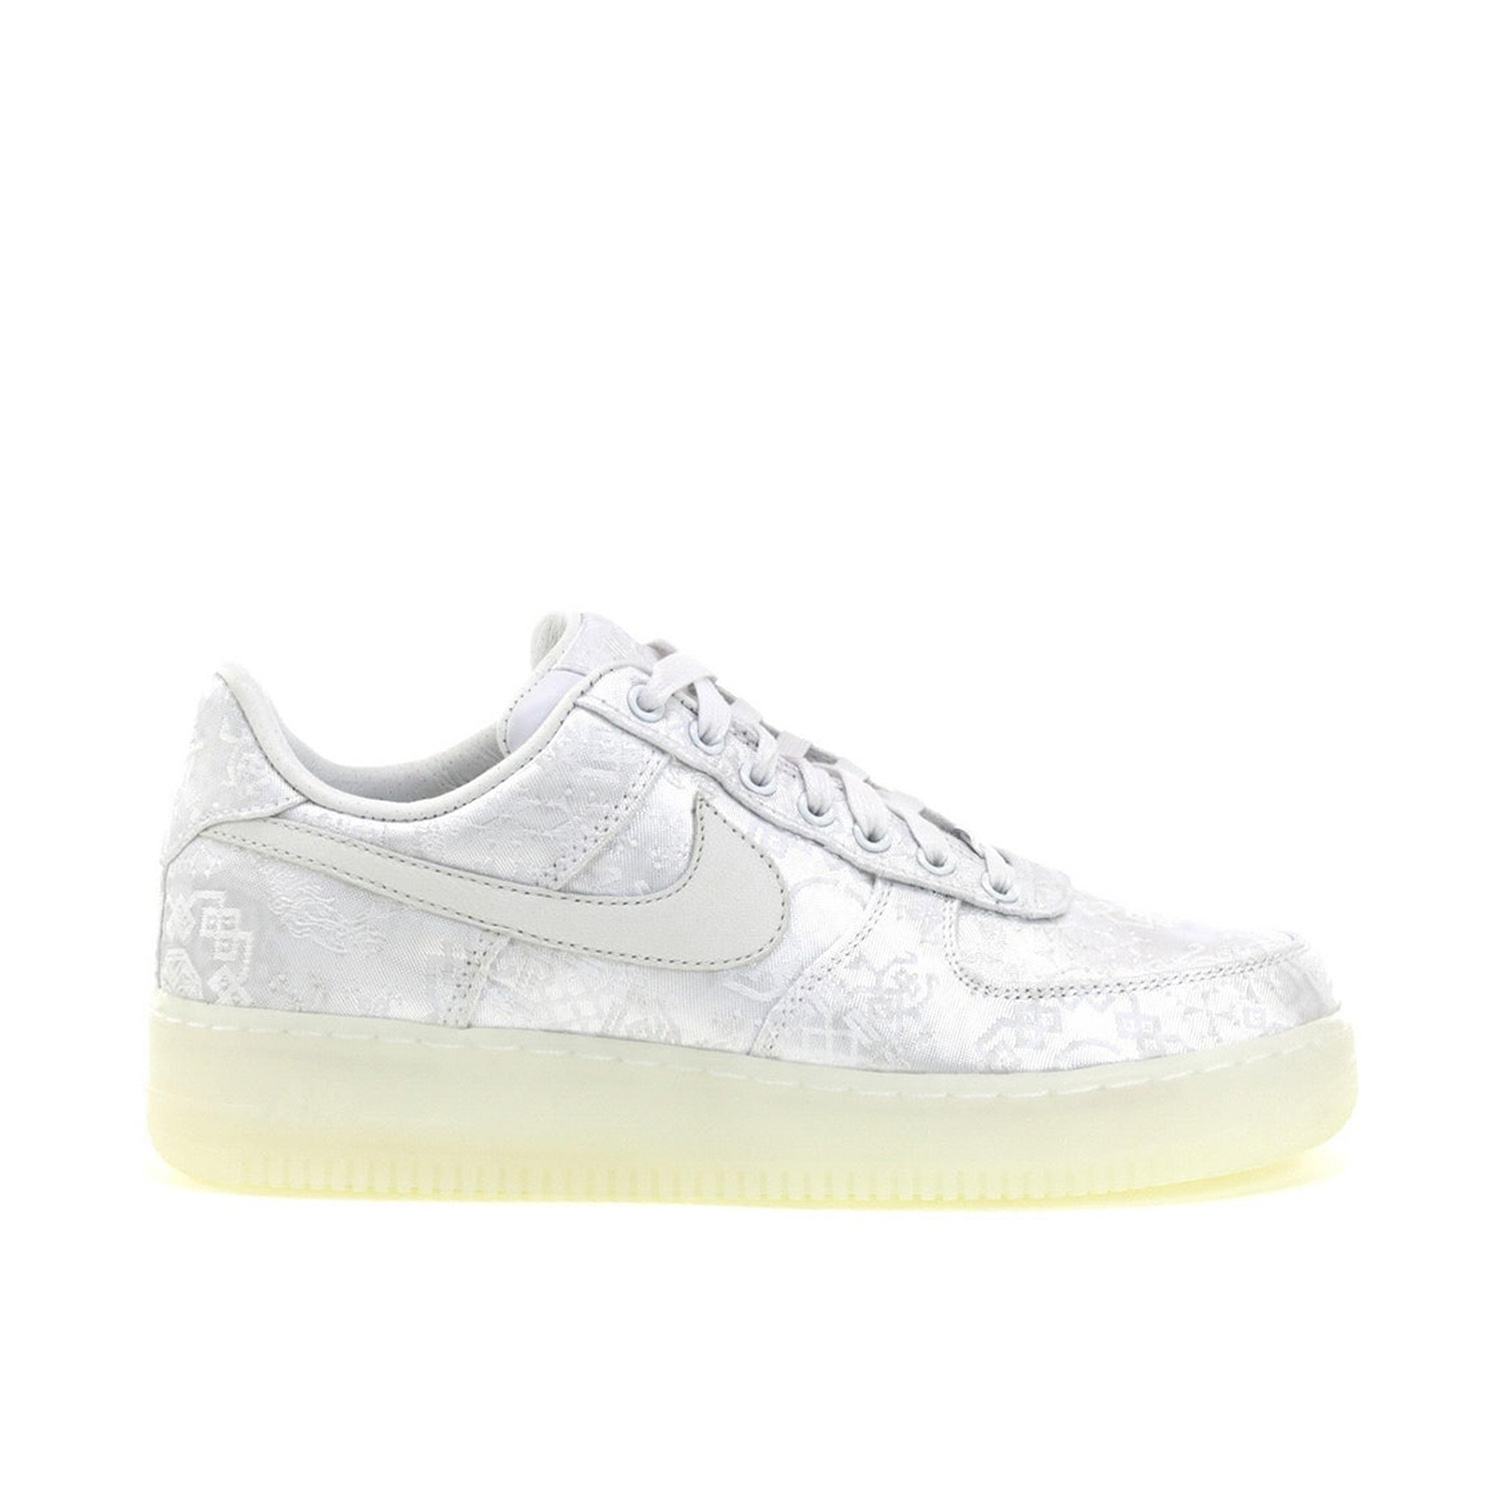 CLOT x Nike Air Force 1 Low White 2018 | AO9286-100 | Laced